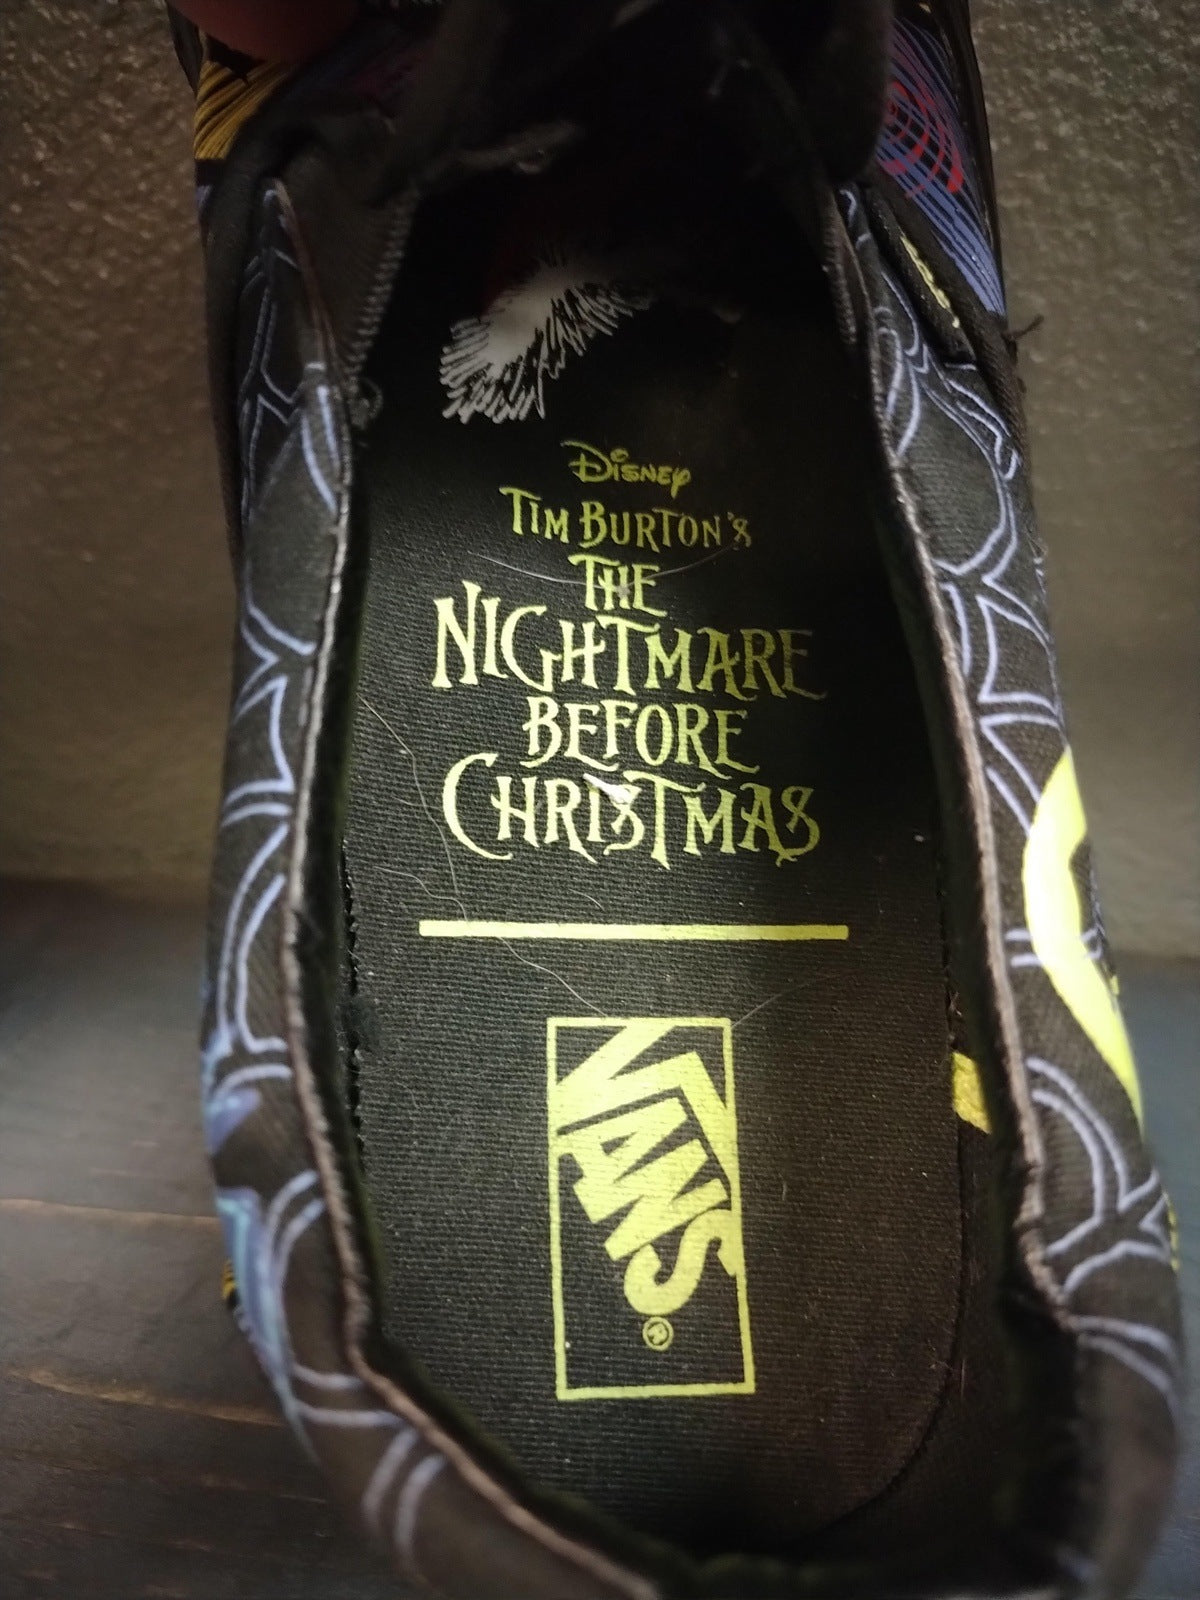 Vans Size 9.5 Nightmare Before Christmas Shoes